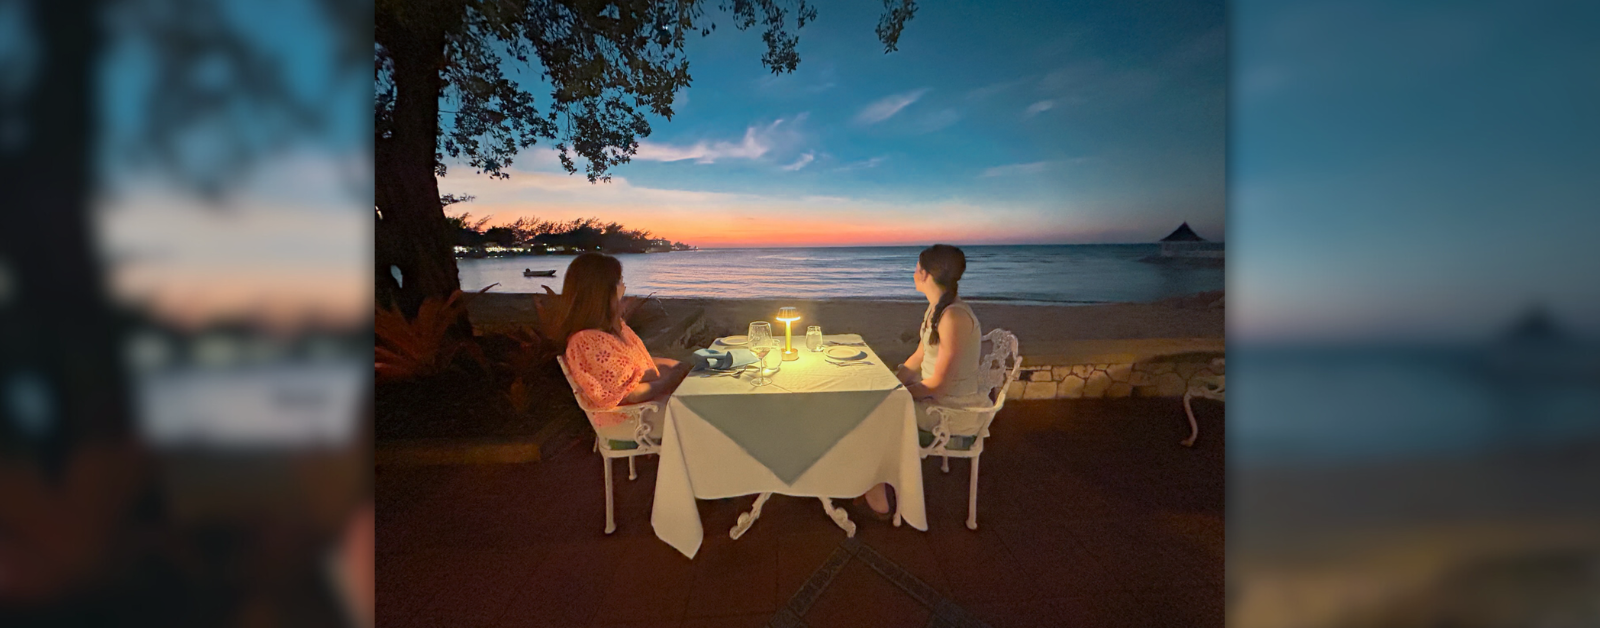 Amy Julia and Marilee sit at a linen-covered table on the beach and look out at the sunset over the ocean